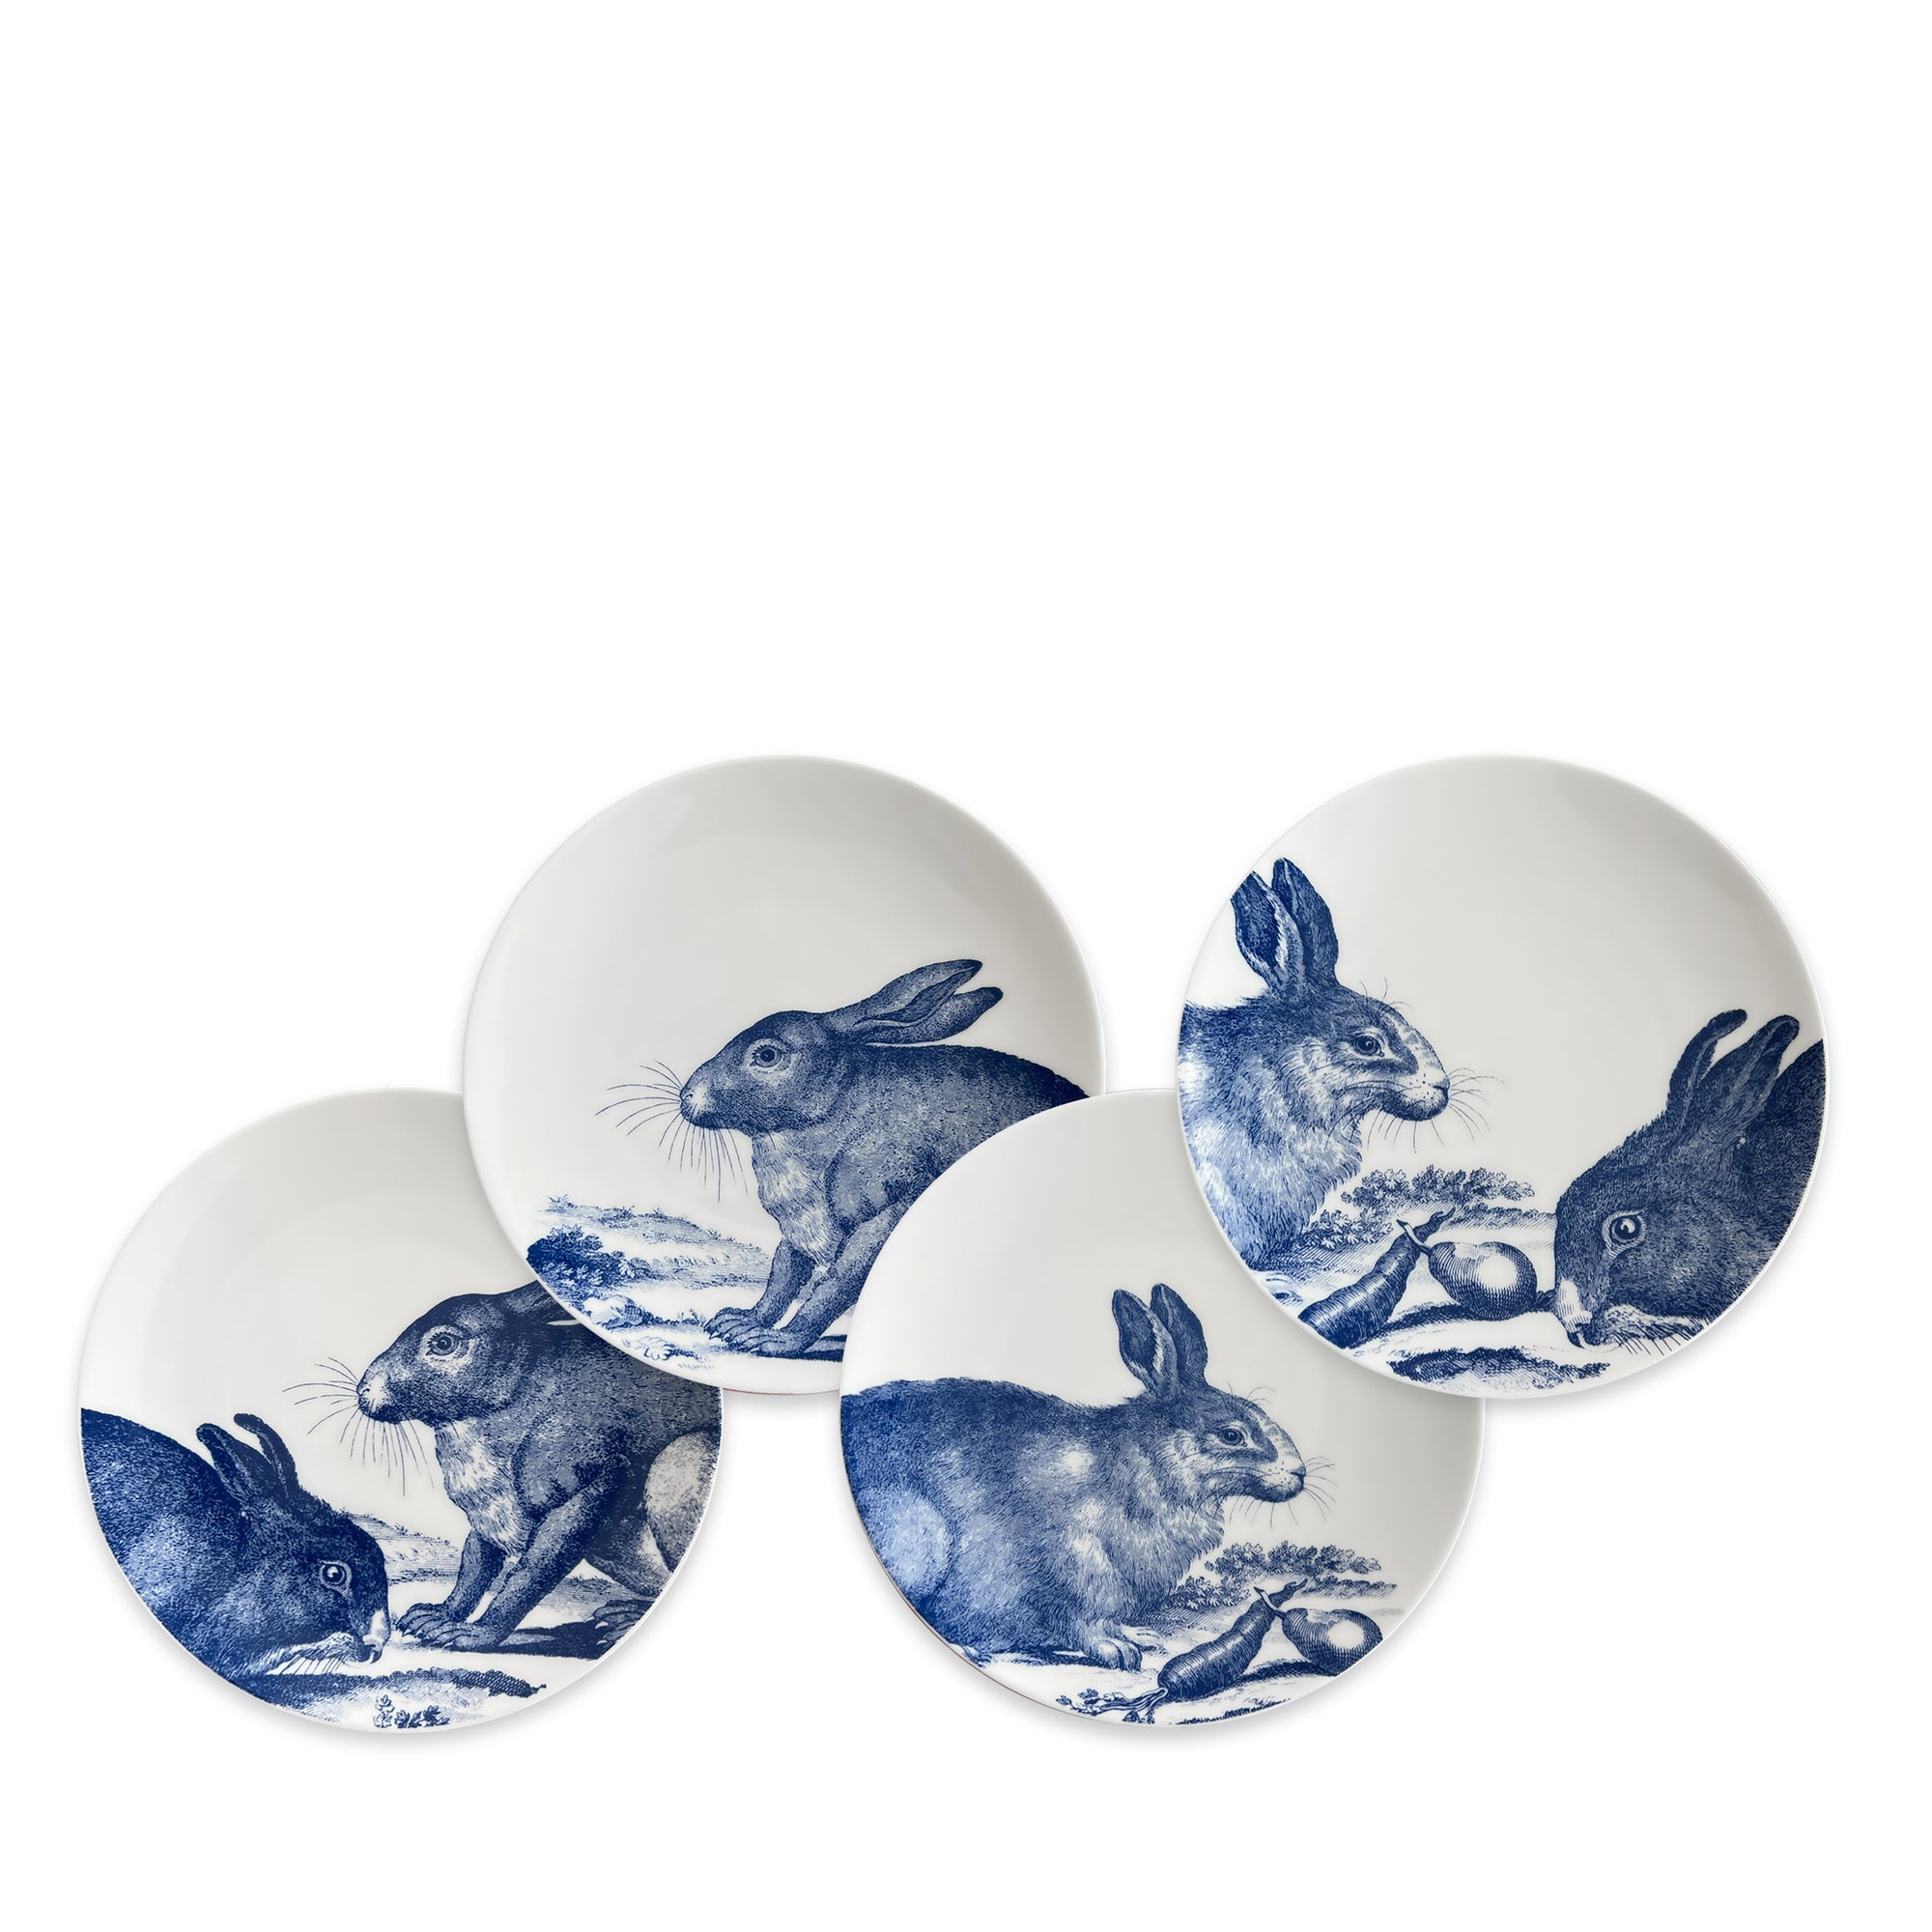 Four high-fired porcelain plates featuring blue illustrations of rabbits in various poses, called Bunnies Small Plates by Caskata Artisanal Home.